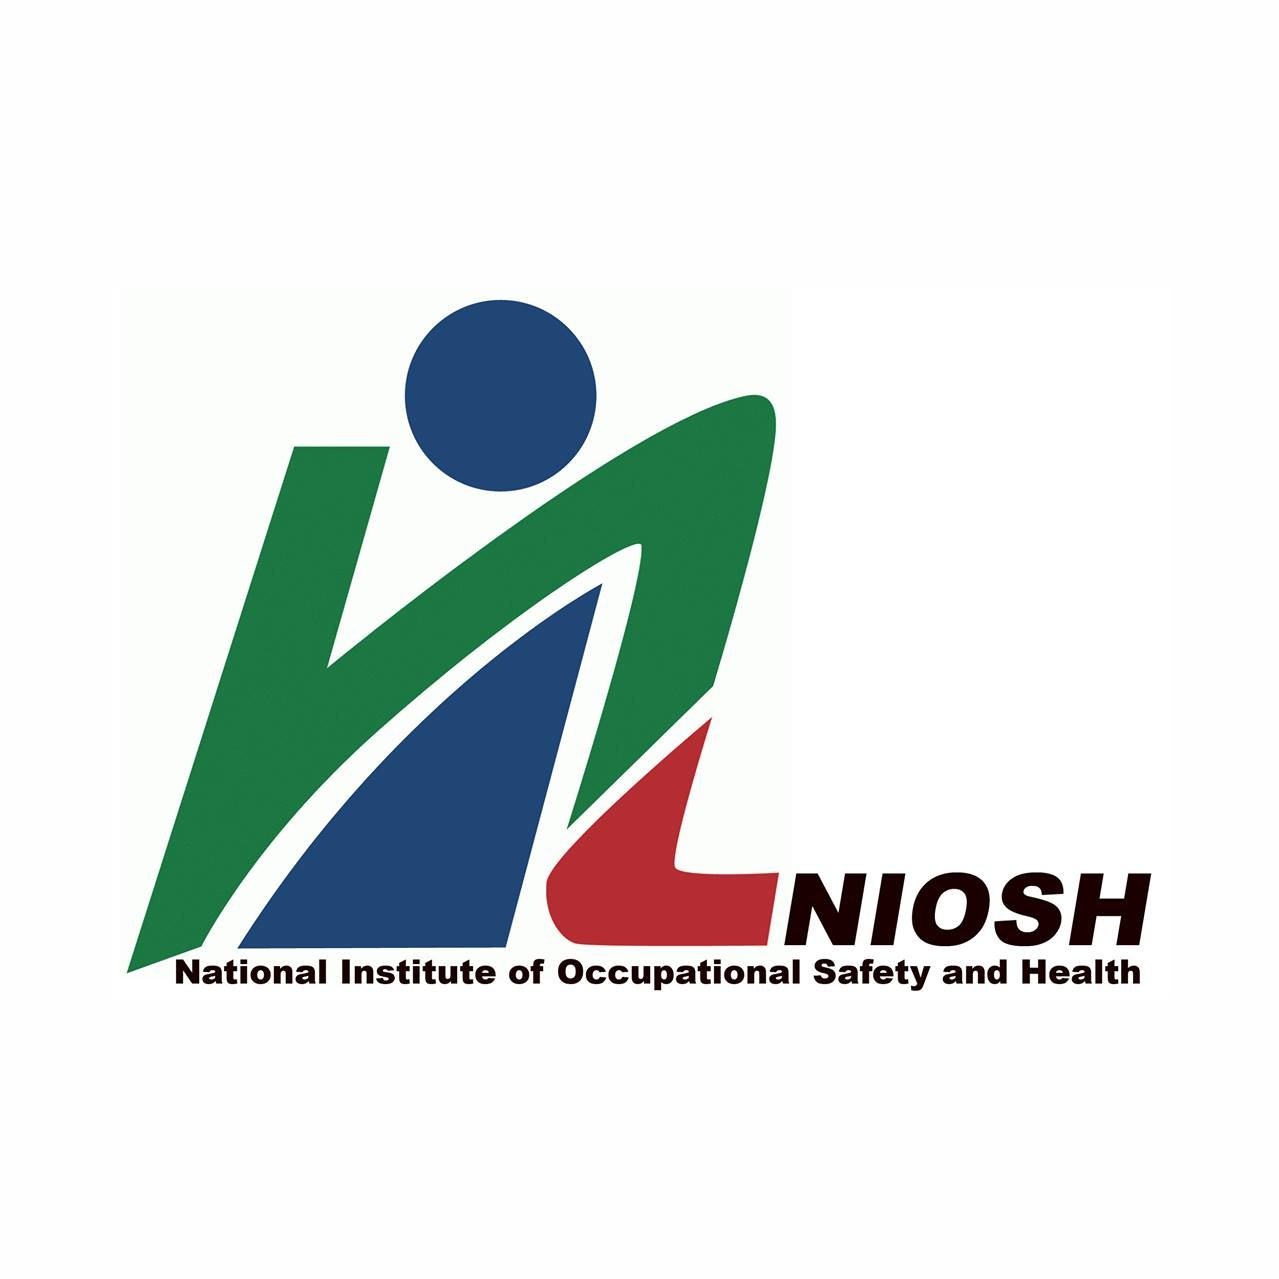 National Institute of Occupational Safety and Health Logo